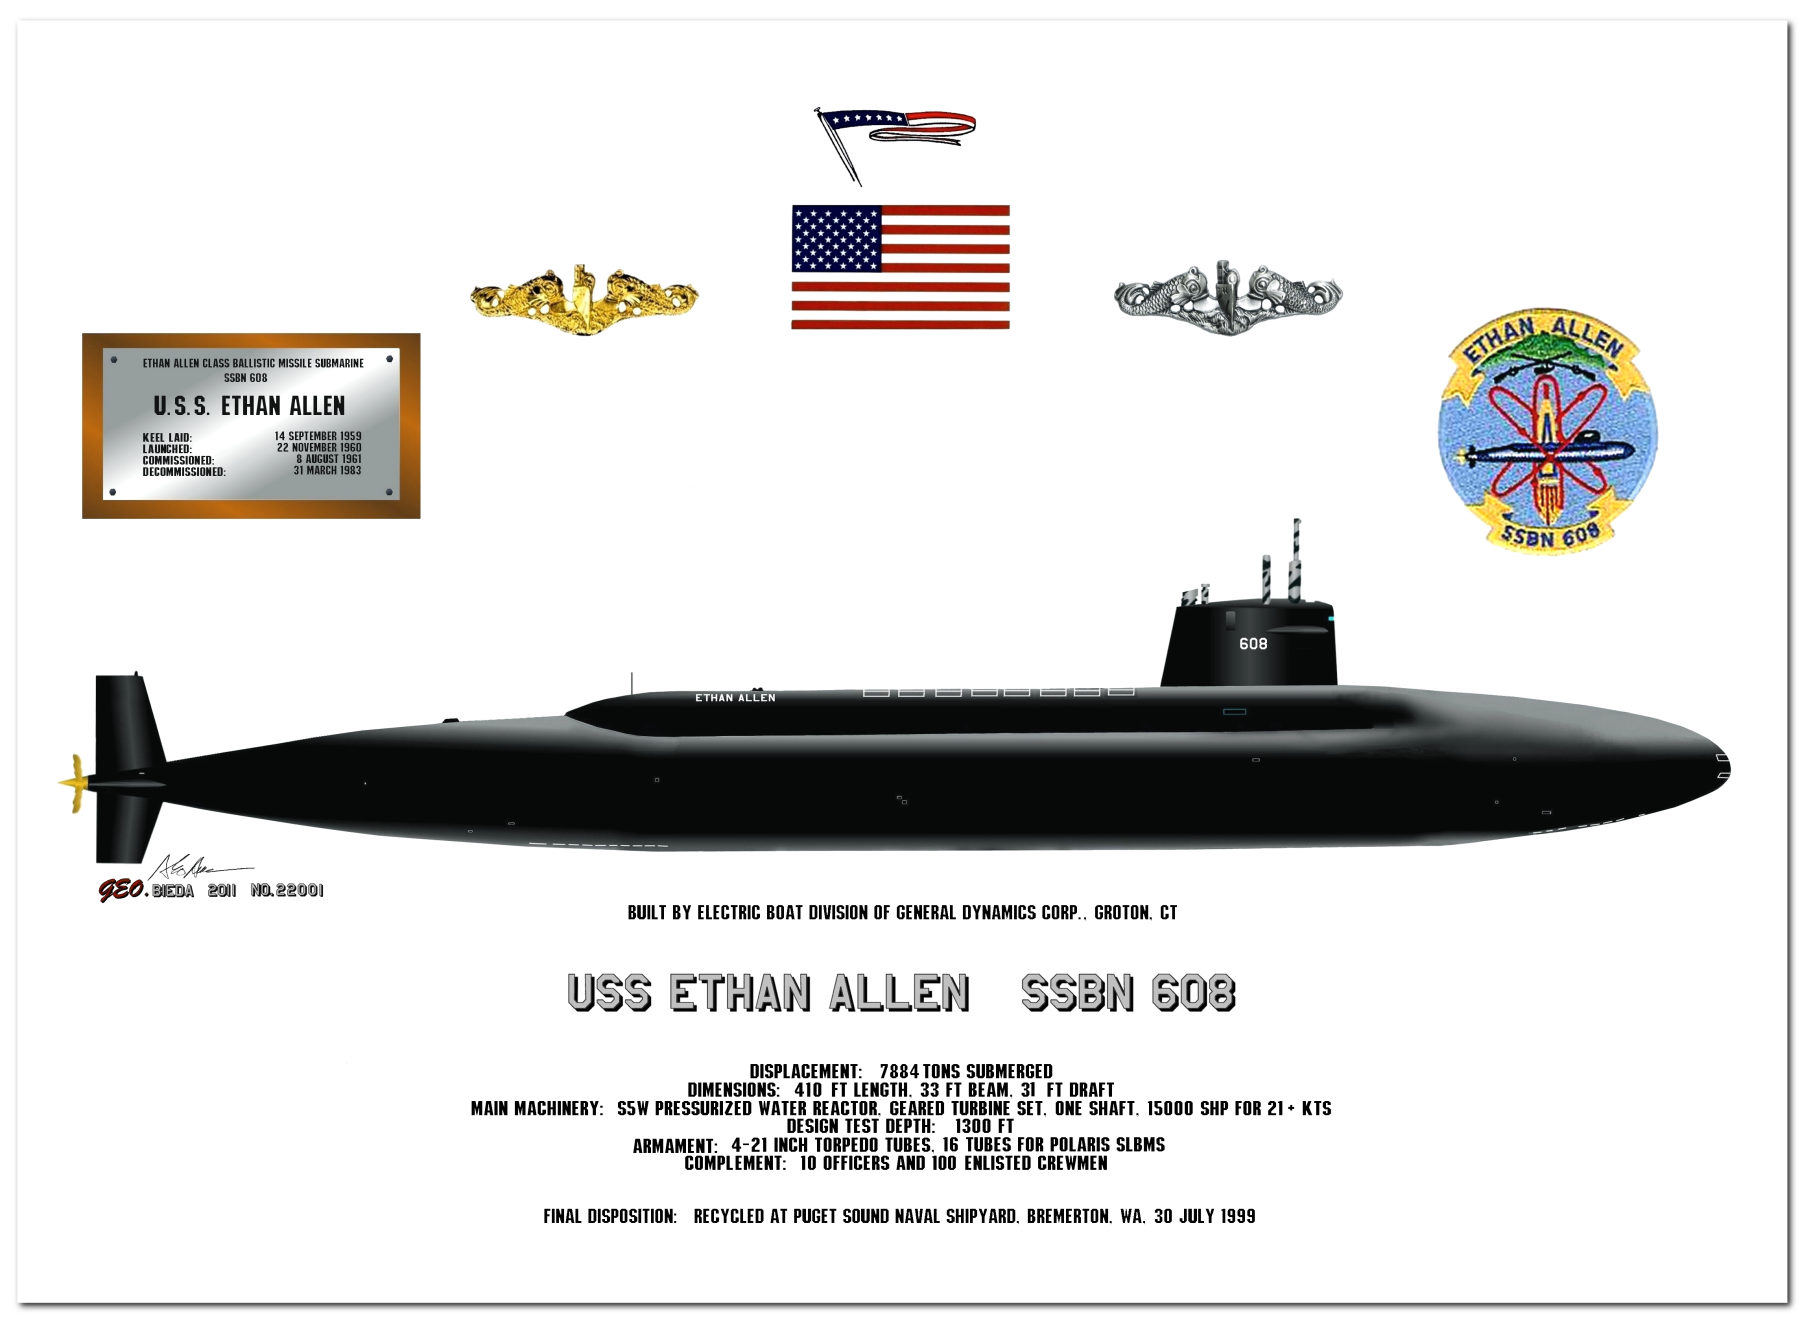 Ethan Allen Class Ballistic Missile Submarine Profile Drawings by George Bieda